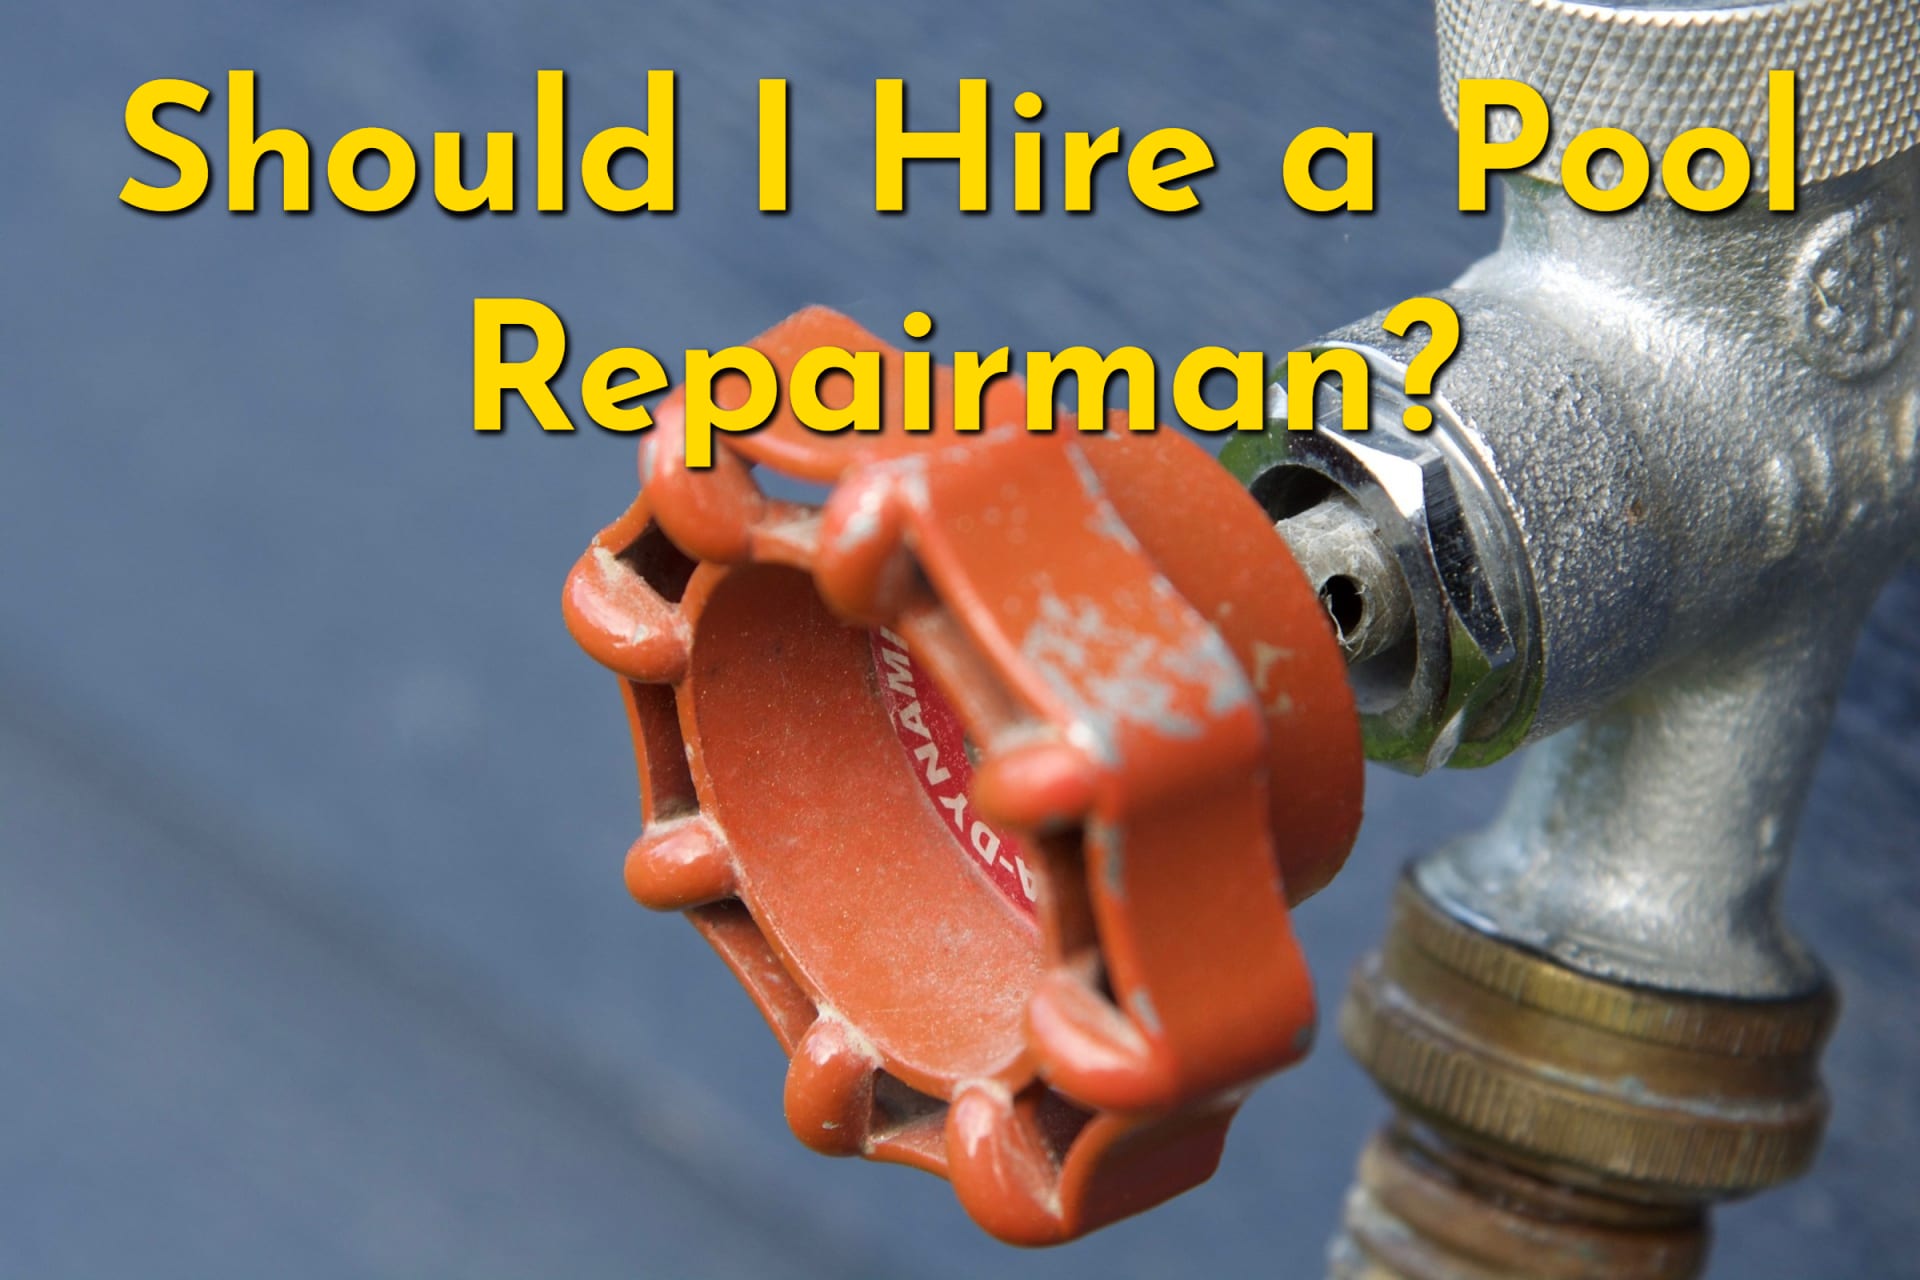 A valve in need of a swimming pool repairman